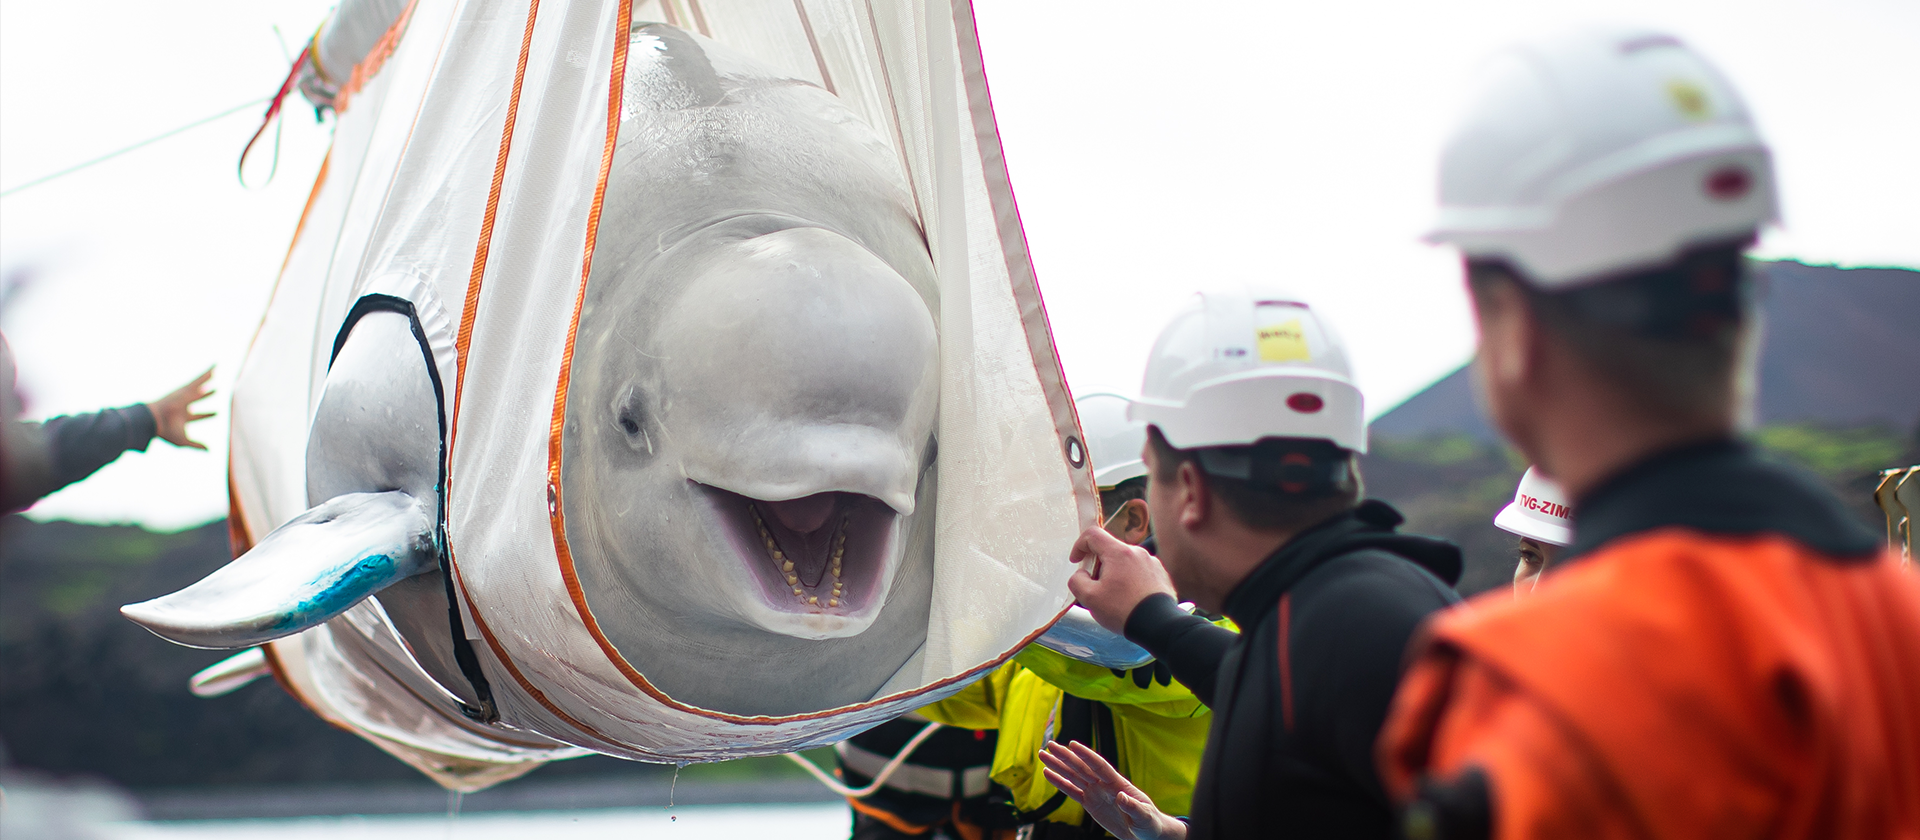 Beluga Whale being rehomed at new Beluga Whale Sanctuary in Iceland thanks to SEA LIFE Trust